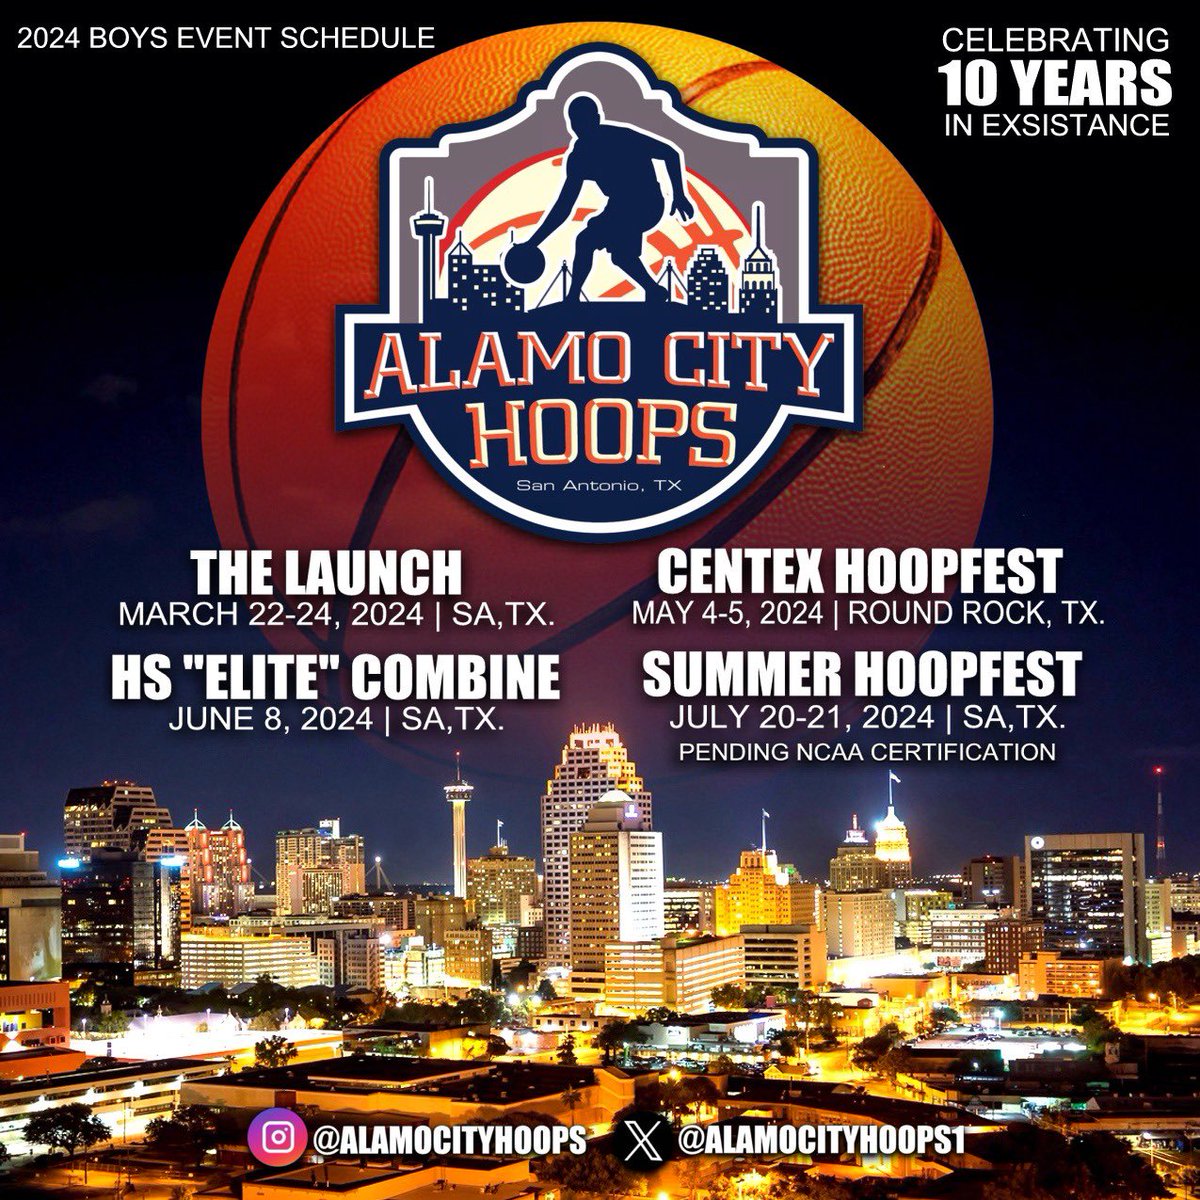 🚨Event Reminder🚨 📆 Mar 22-24 “The Launch”🚀 📆 May 3-5 “CenTX Hoopsfest”🏀 📆 July 20-21 “Summer Hoopsfest”🔥 (Pend. NCAA Cert) 🔗 alamocityhoops.com/2024-events You know what we do💯 #AlamoCityHoops @Jewlzonthemic @HerreraKaia @drehayes_ @JayCollins_1 @isaiah_ACH @AndrewBrich13